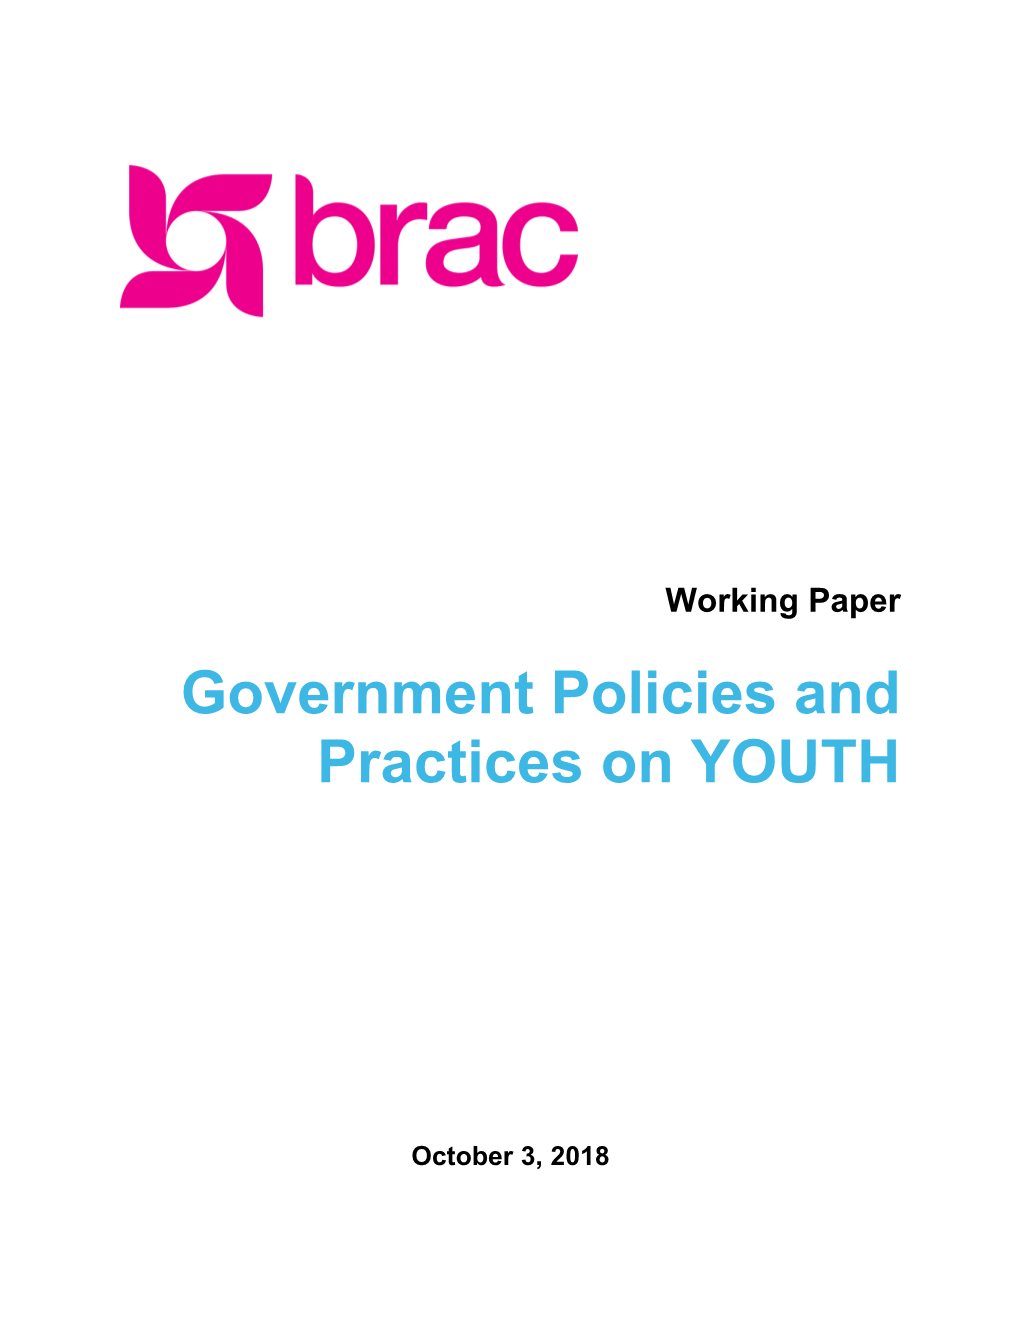 Working Paper: Government Policies and Practices on YOUTH